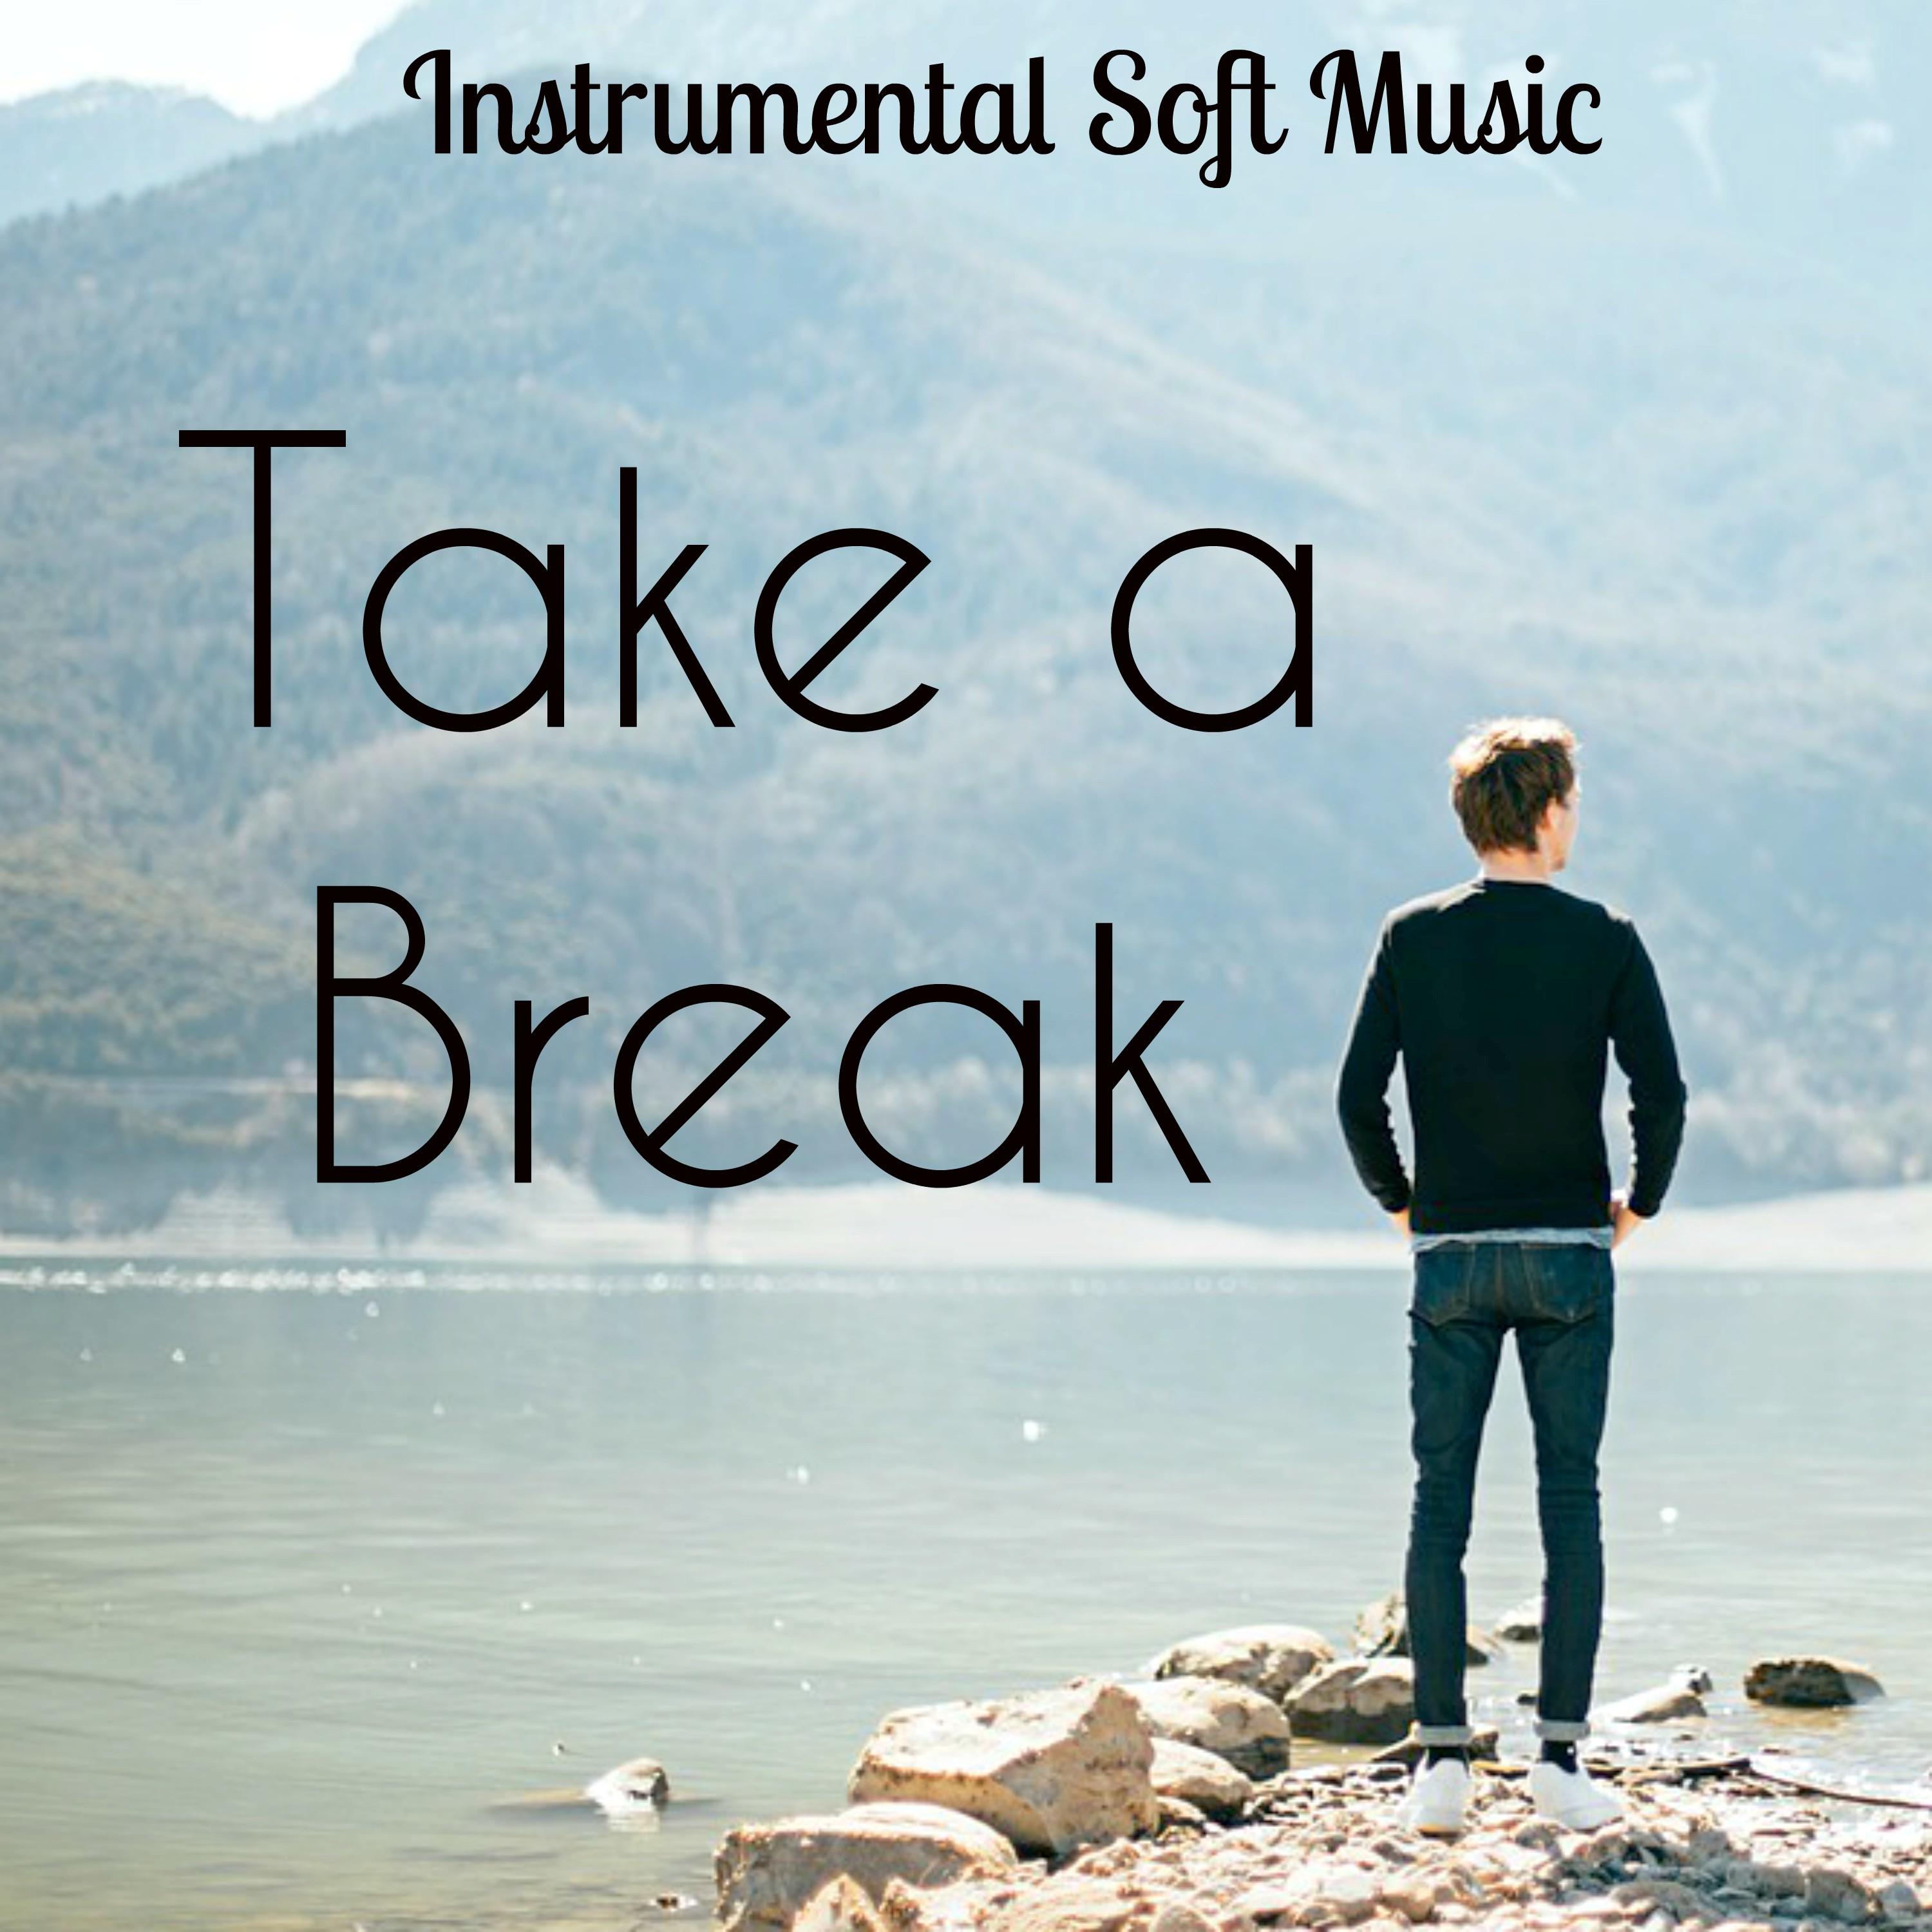 Take a Break - Instrumental Soft Music for Healing Massage Bio Life with New Age Nature Sounds